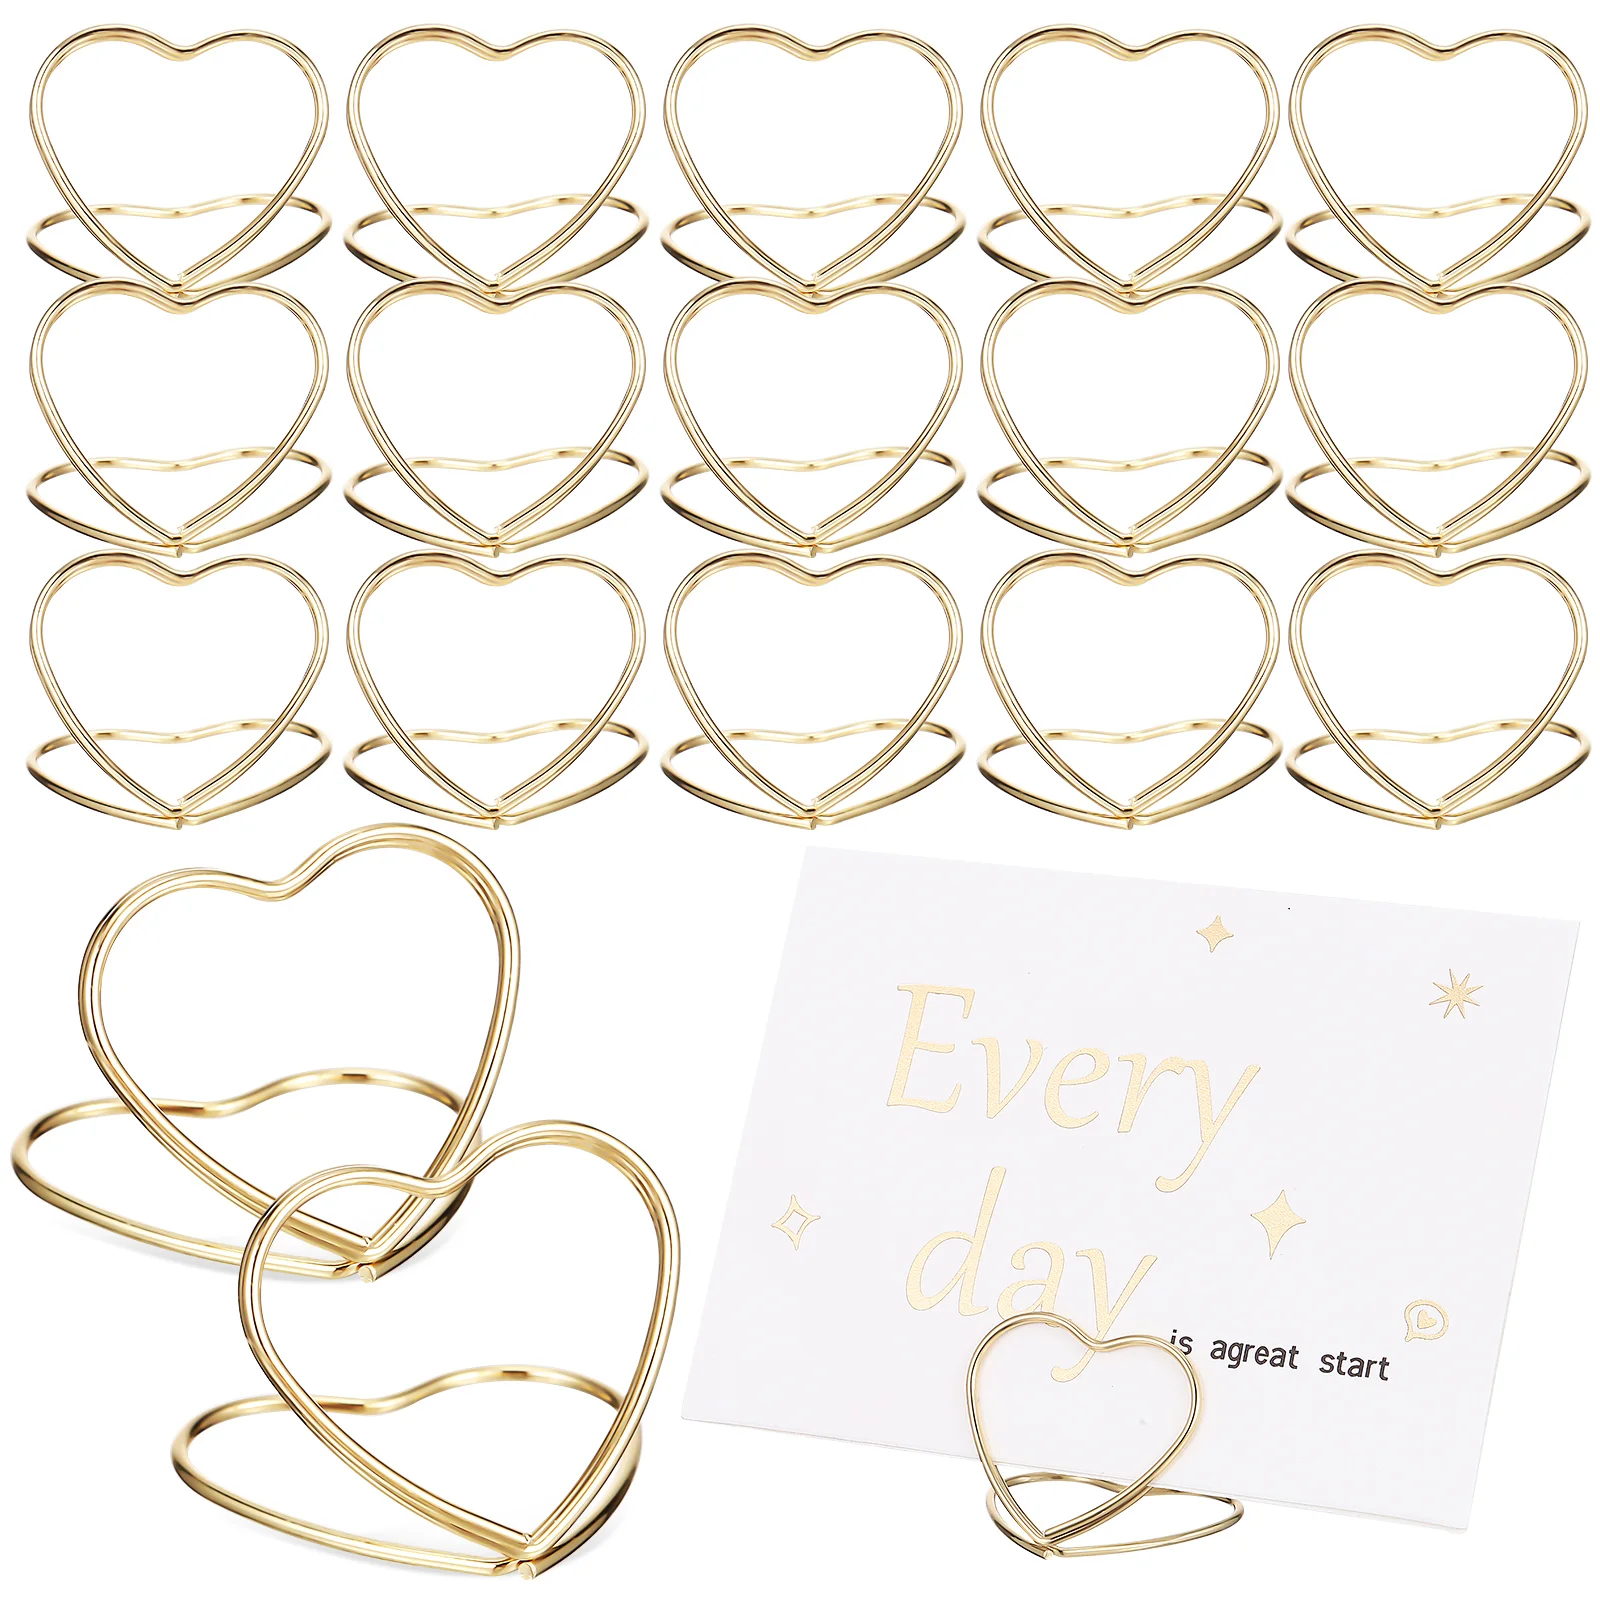 

48 Pcs Card Holders Heart Place Card Holders Desk Picture Stands Memo Clips for Holiday Wedding